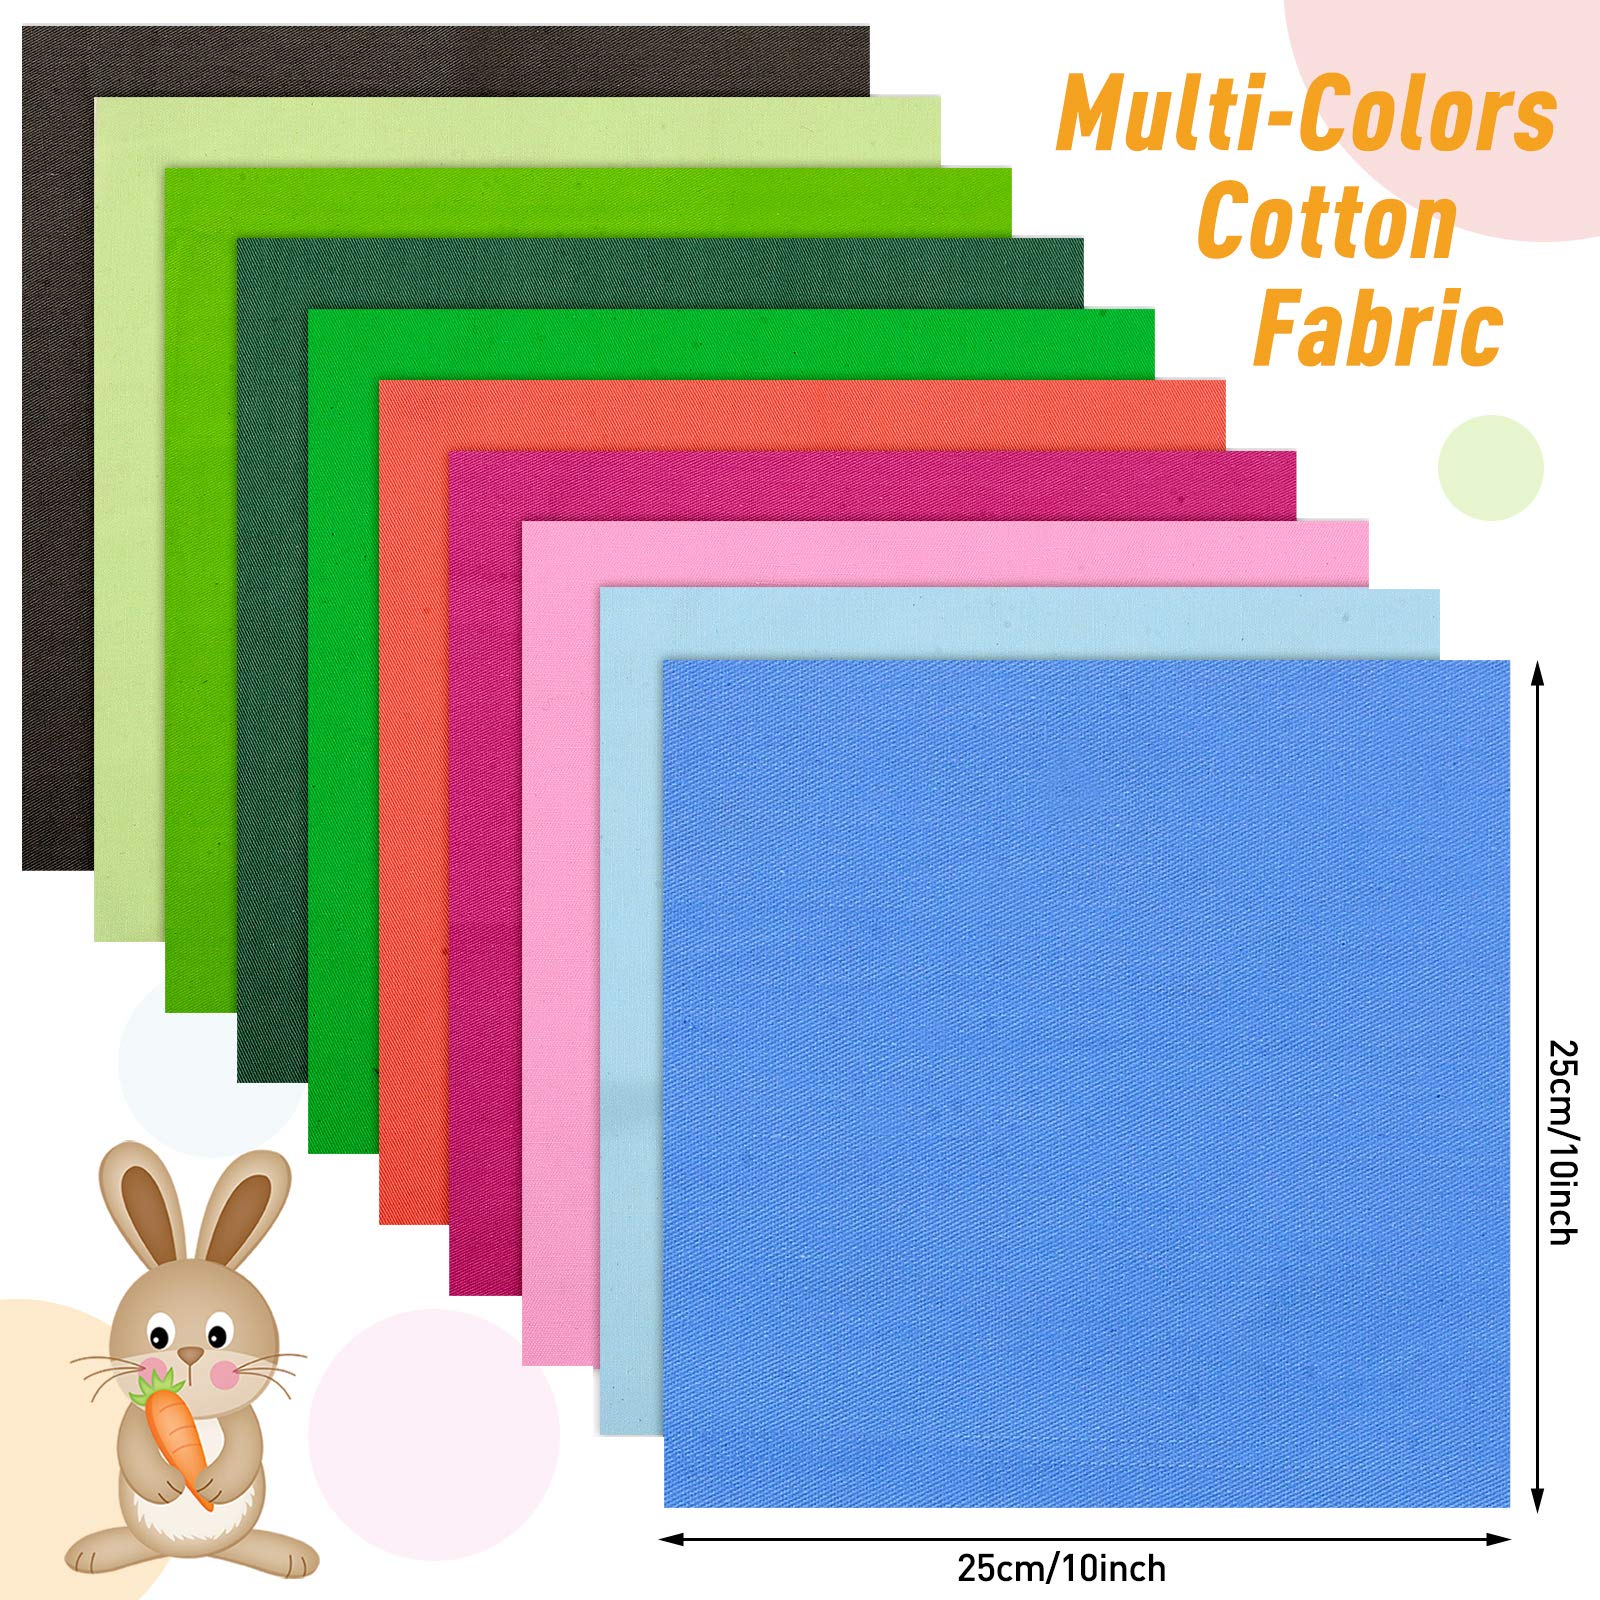 Macarrie 40 Piece Solid Color Fabric Bundles 10 x 10 Inch Multi-Color Fabric Squares Quilting Fabric Patchwork Sewing Craft Precut Fabric Scrap for DIY Sewing Craft (Classic Color)